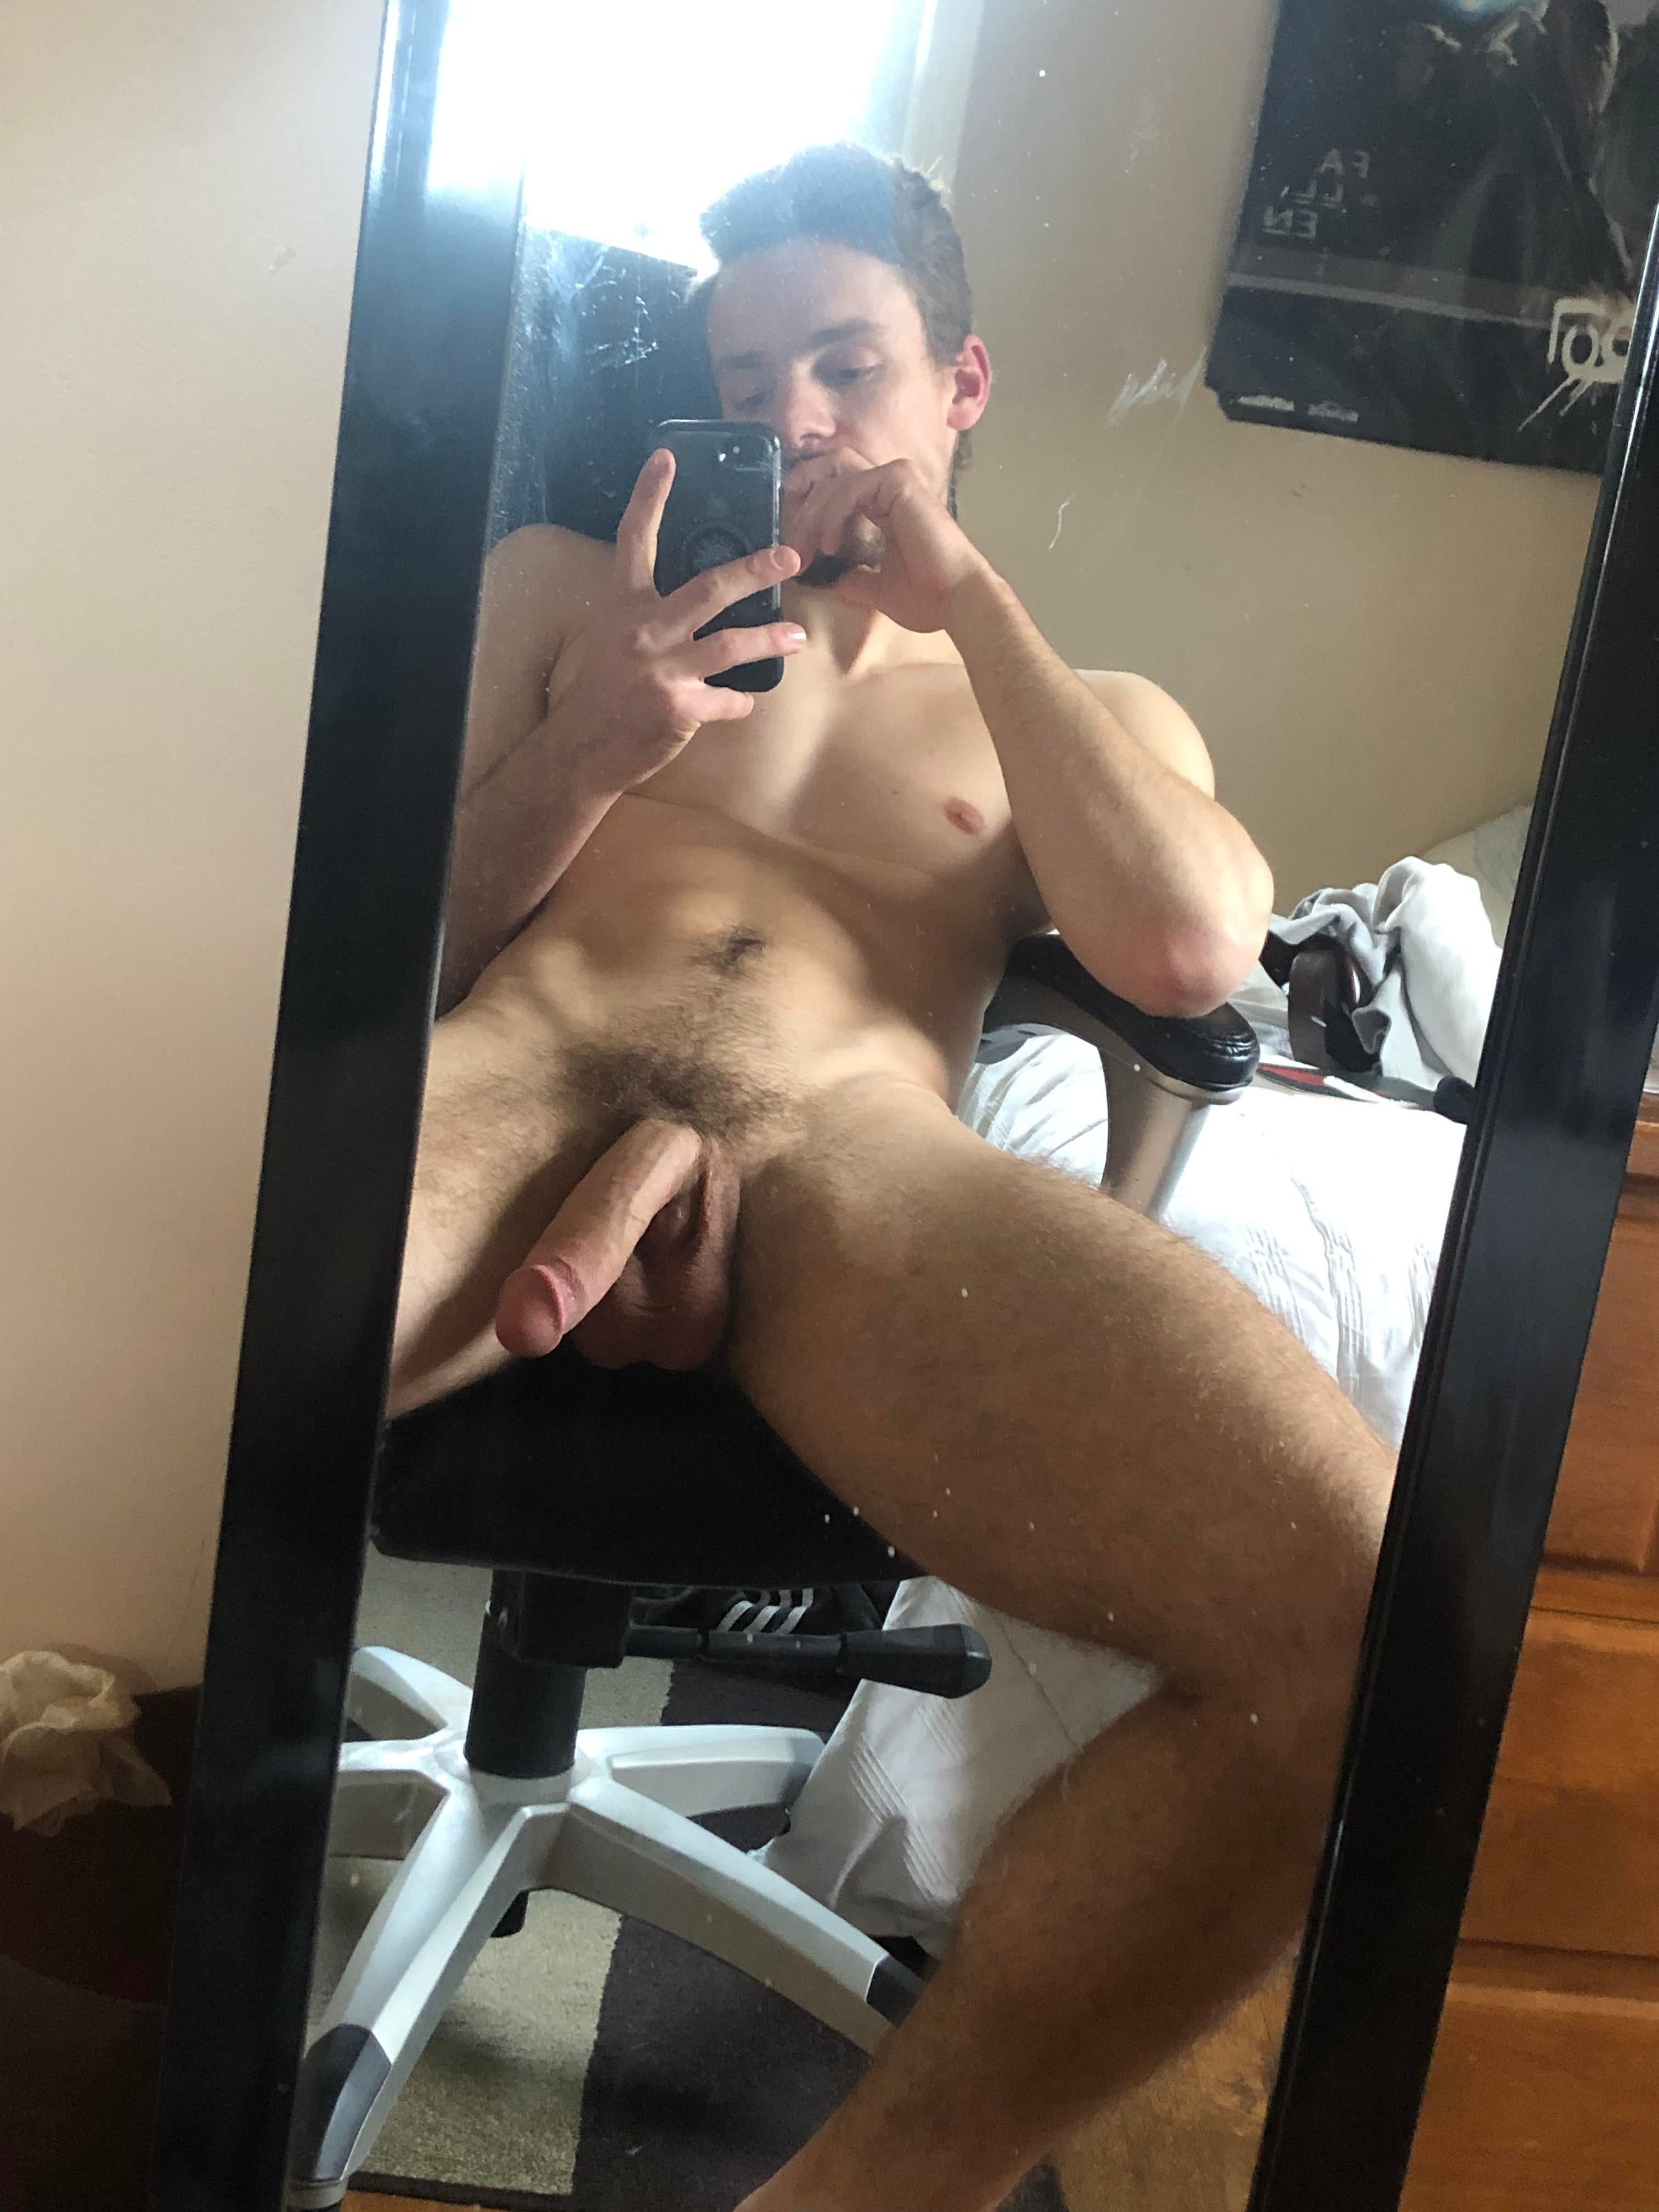 Male nude sexting dick pic collection